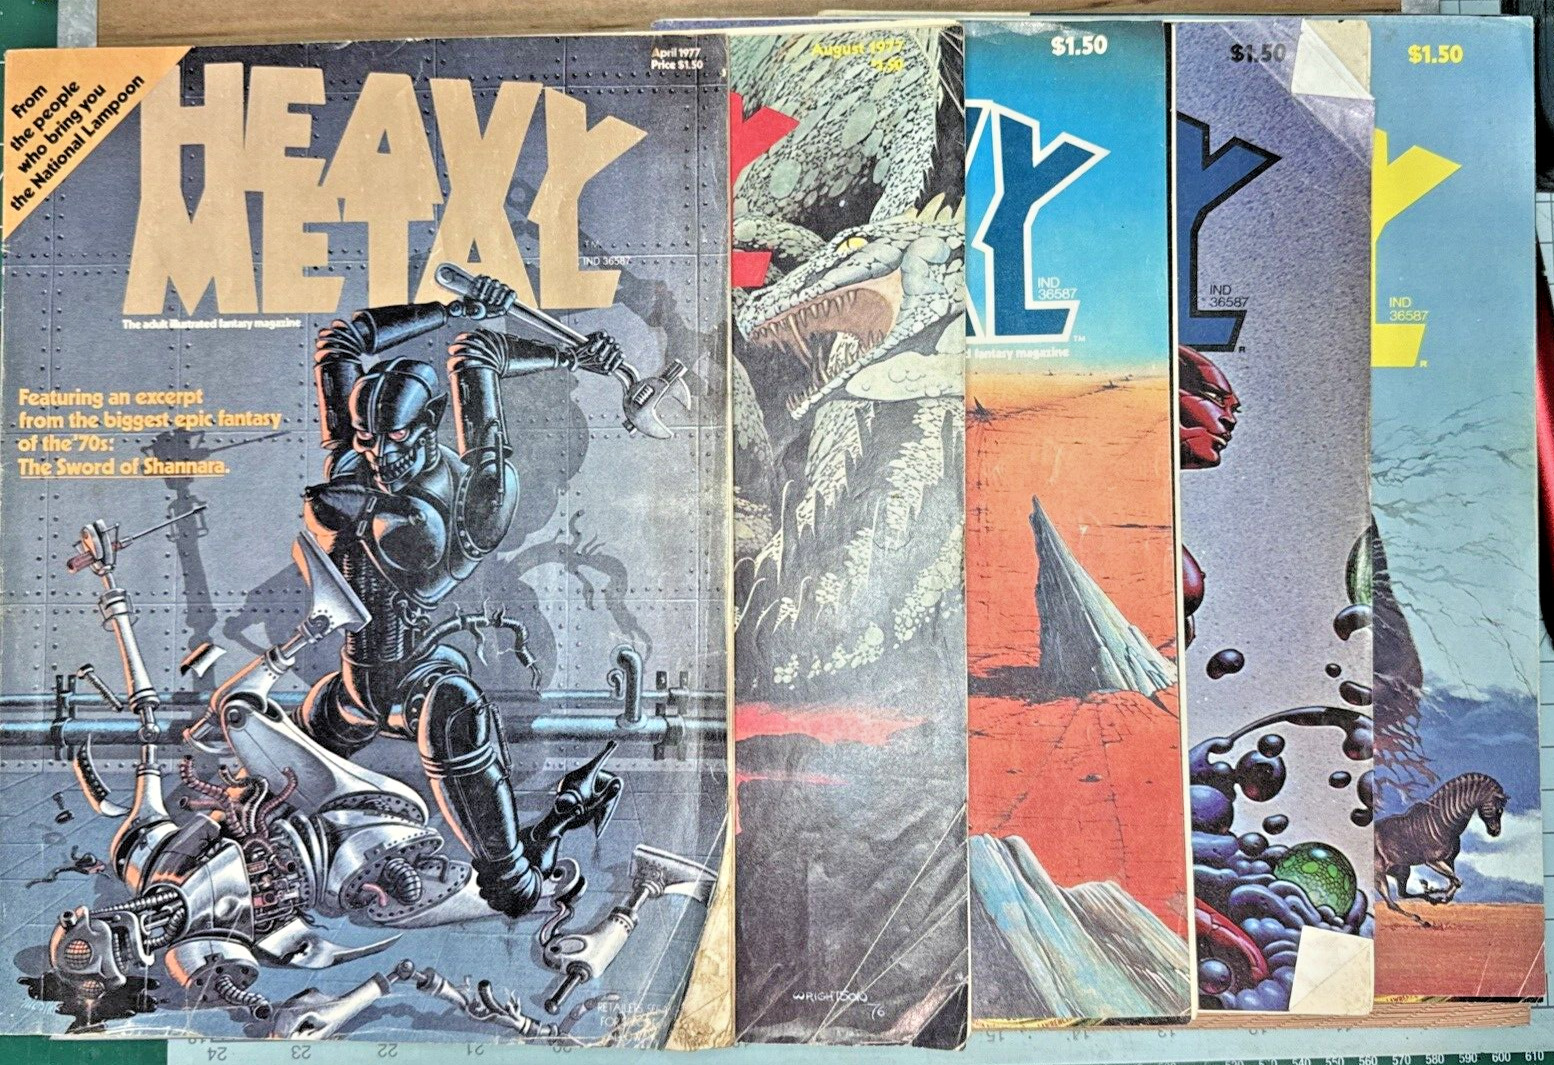 Vtg 70s Heavy Metal Magazine Qty 5 1977 Includes First Issue - READ DESCRIPTION